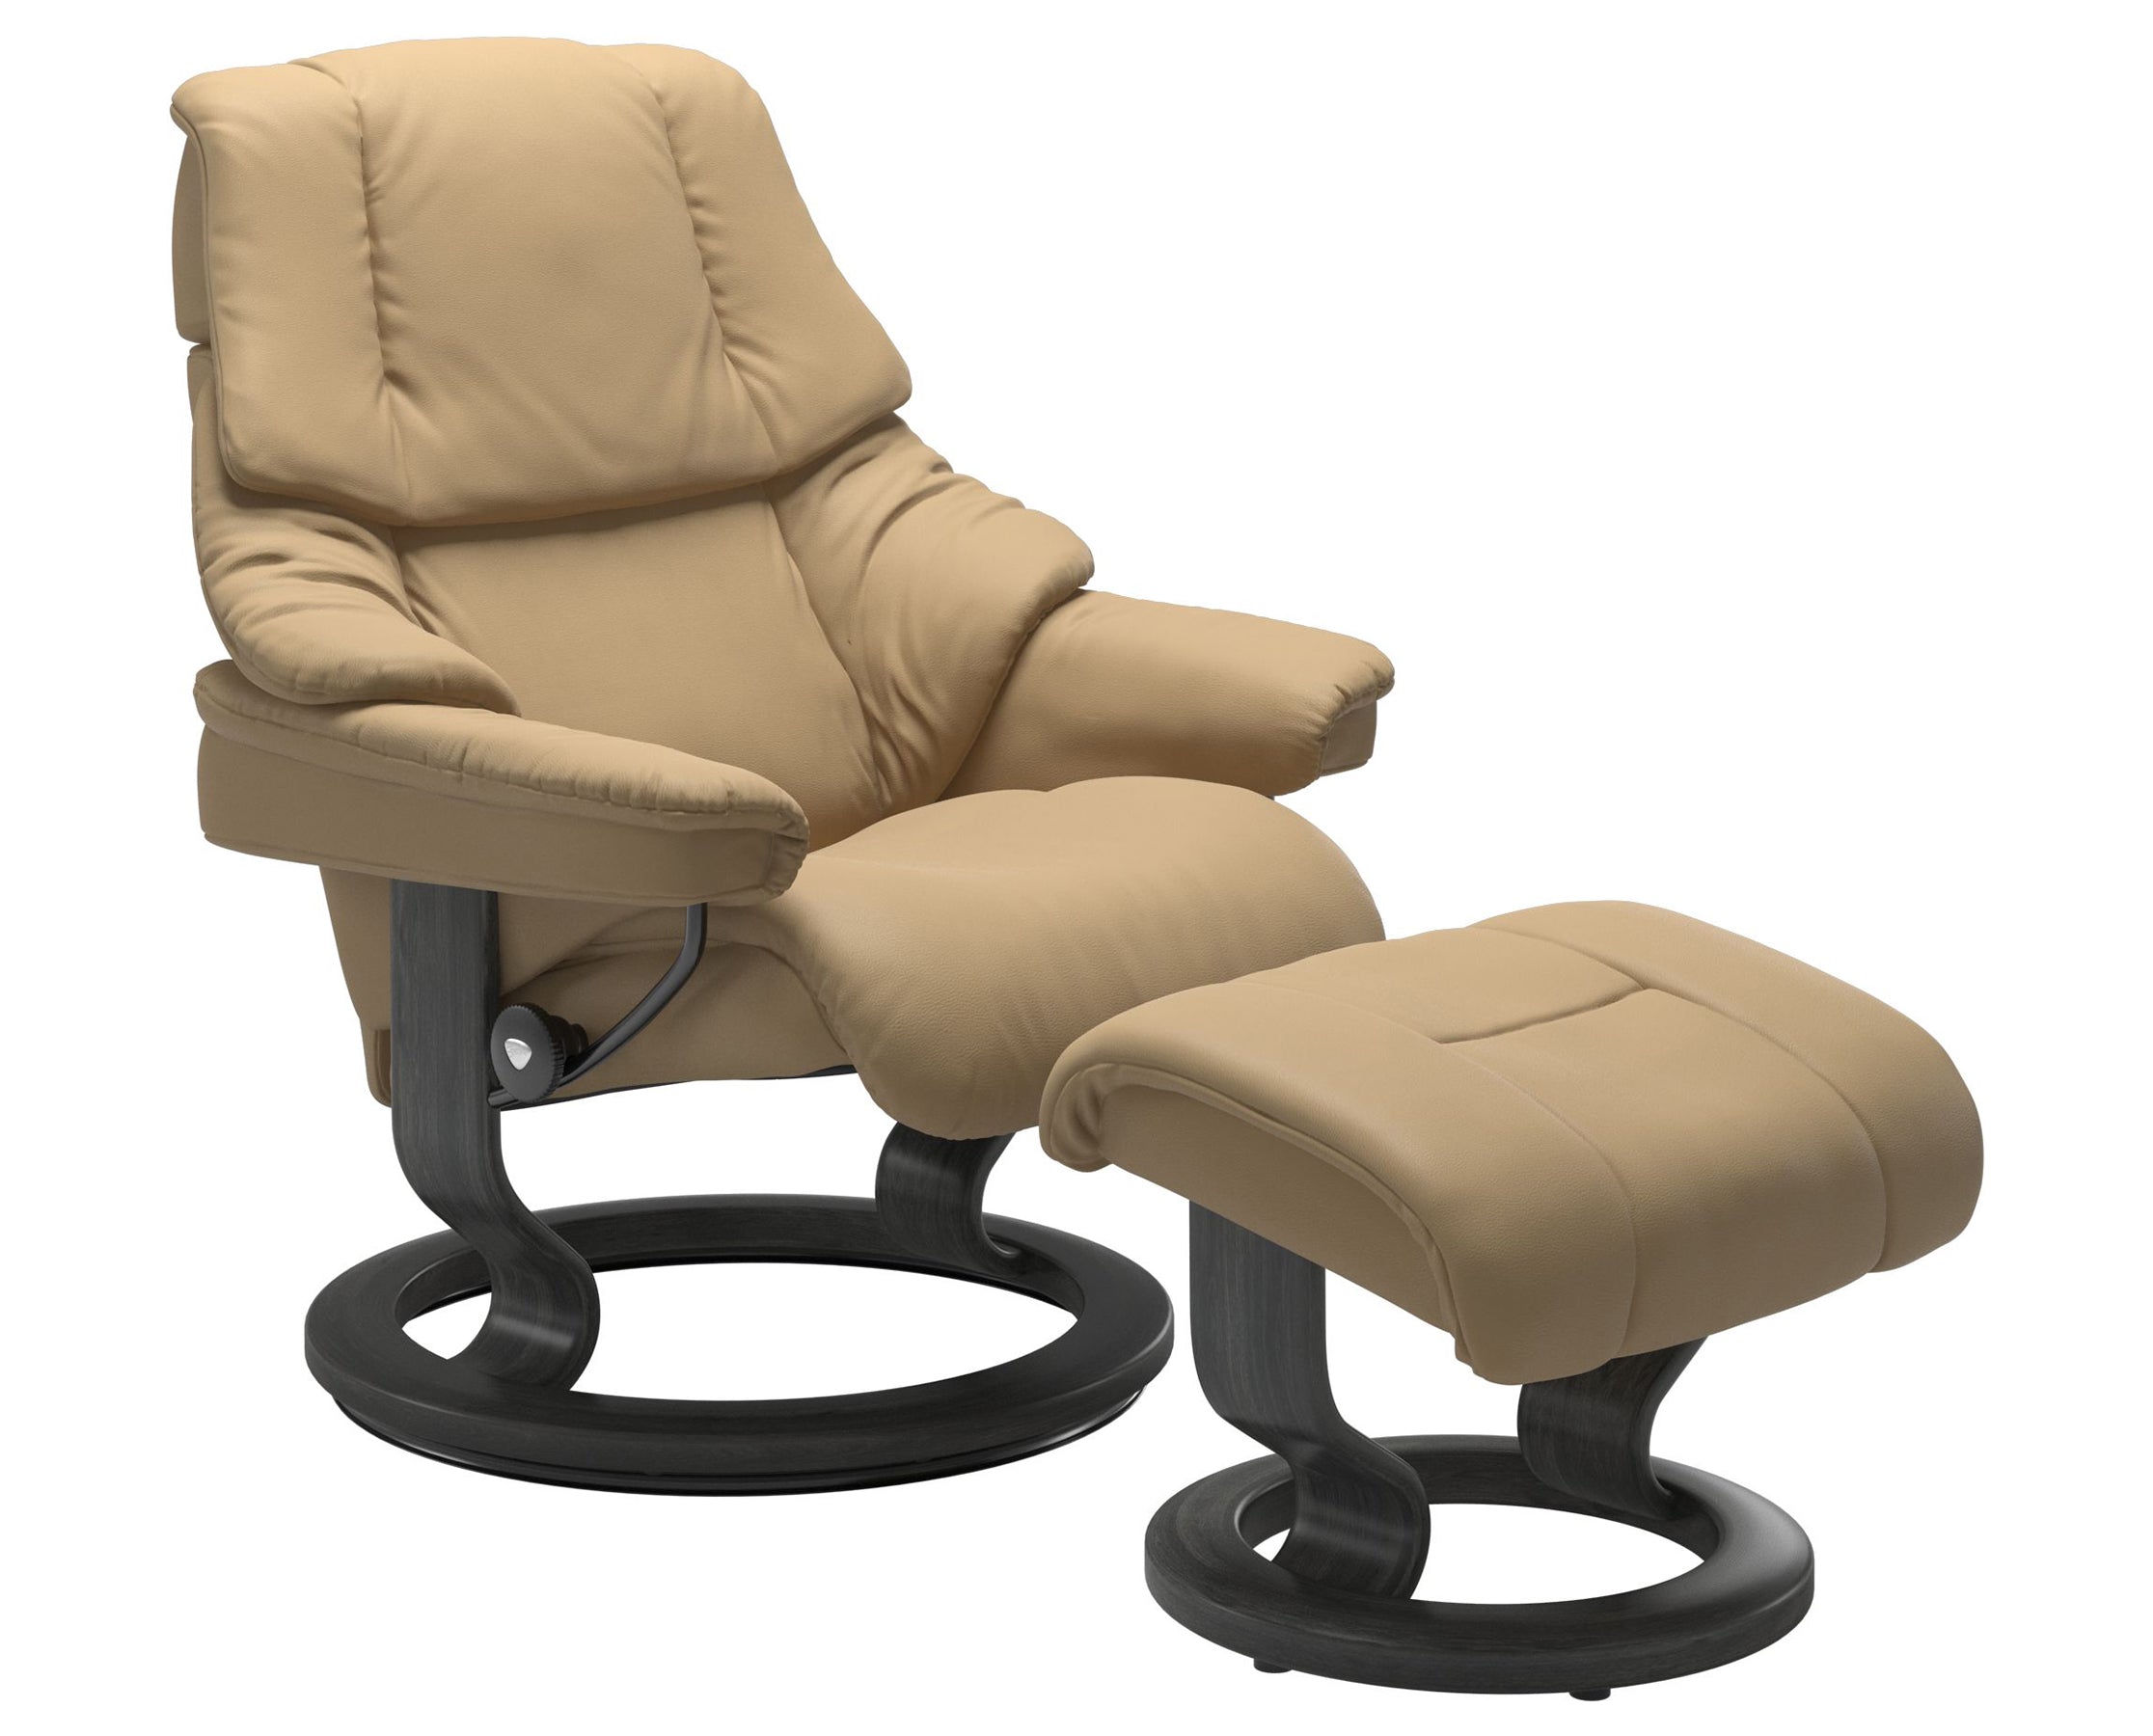 Paloma Leather Sand S/M/L and Grey Base | Stressless Reno Classic Recliner | Valley Ridge Furniture